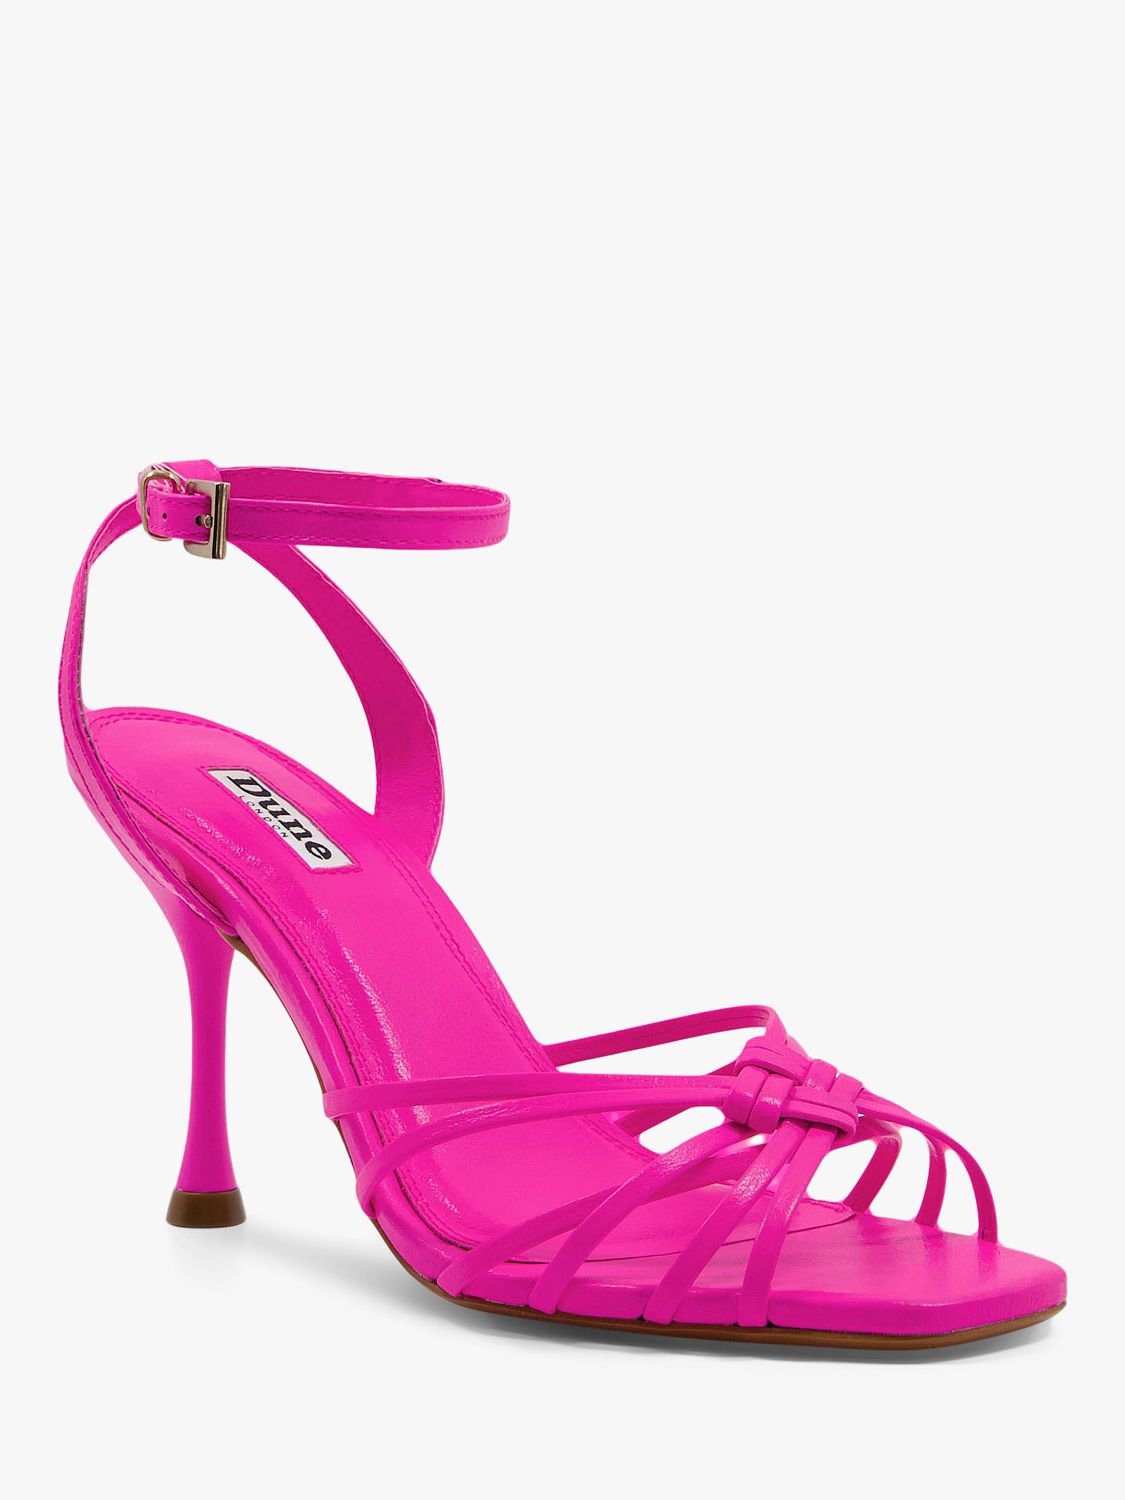 Buy Dune Manner Leather Strappy Sandals Online at johnlewis.com